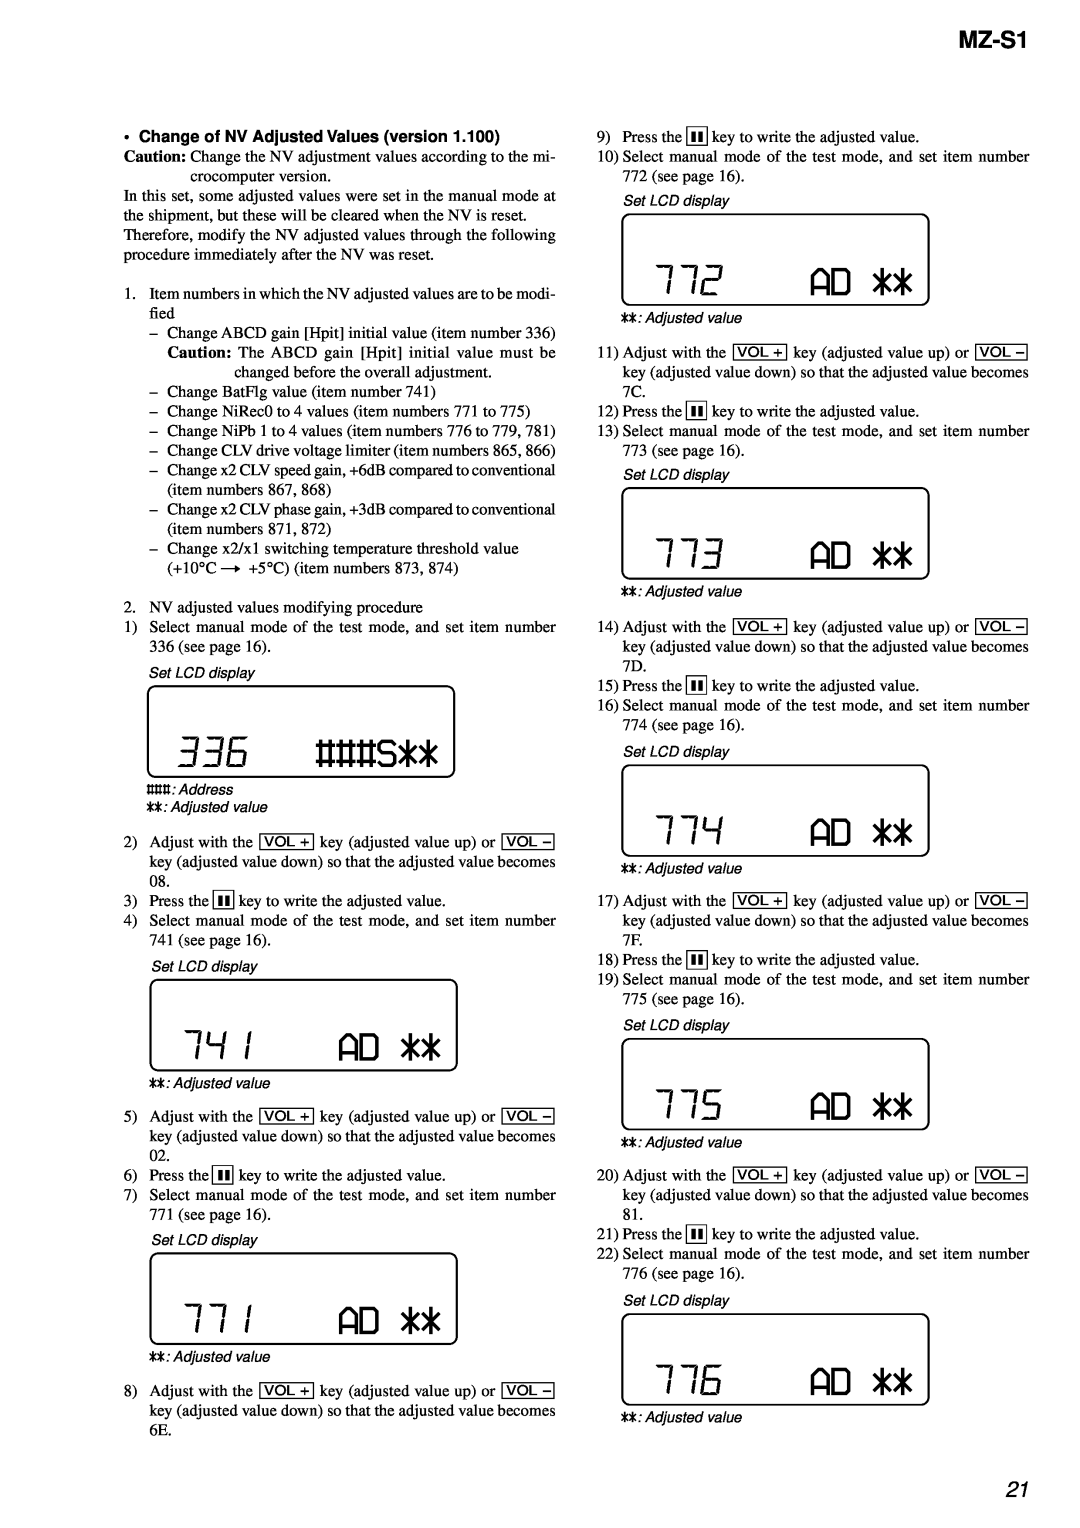 Sony MZ-S1 service manual 336###S, 741AD, 771AD, 772AD, 773AD, 774AD, 775AD, 776AD, Change of NV Adjusted Values version 